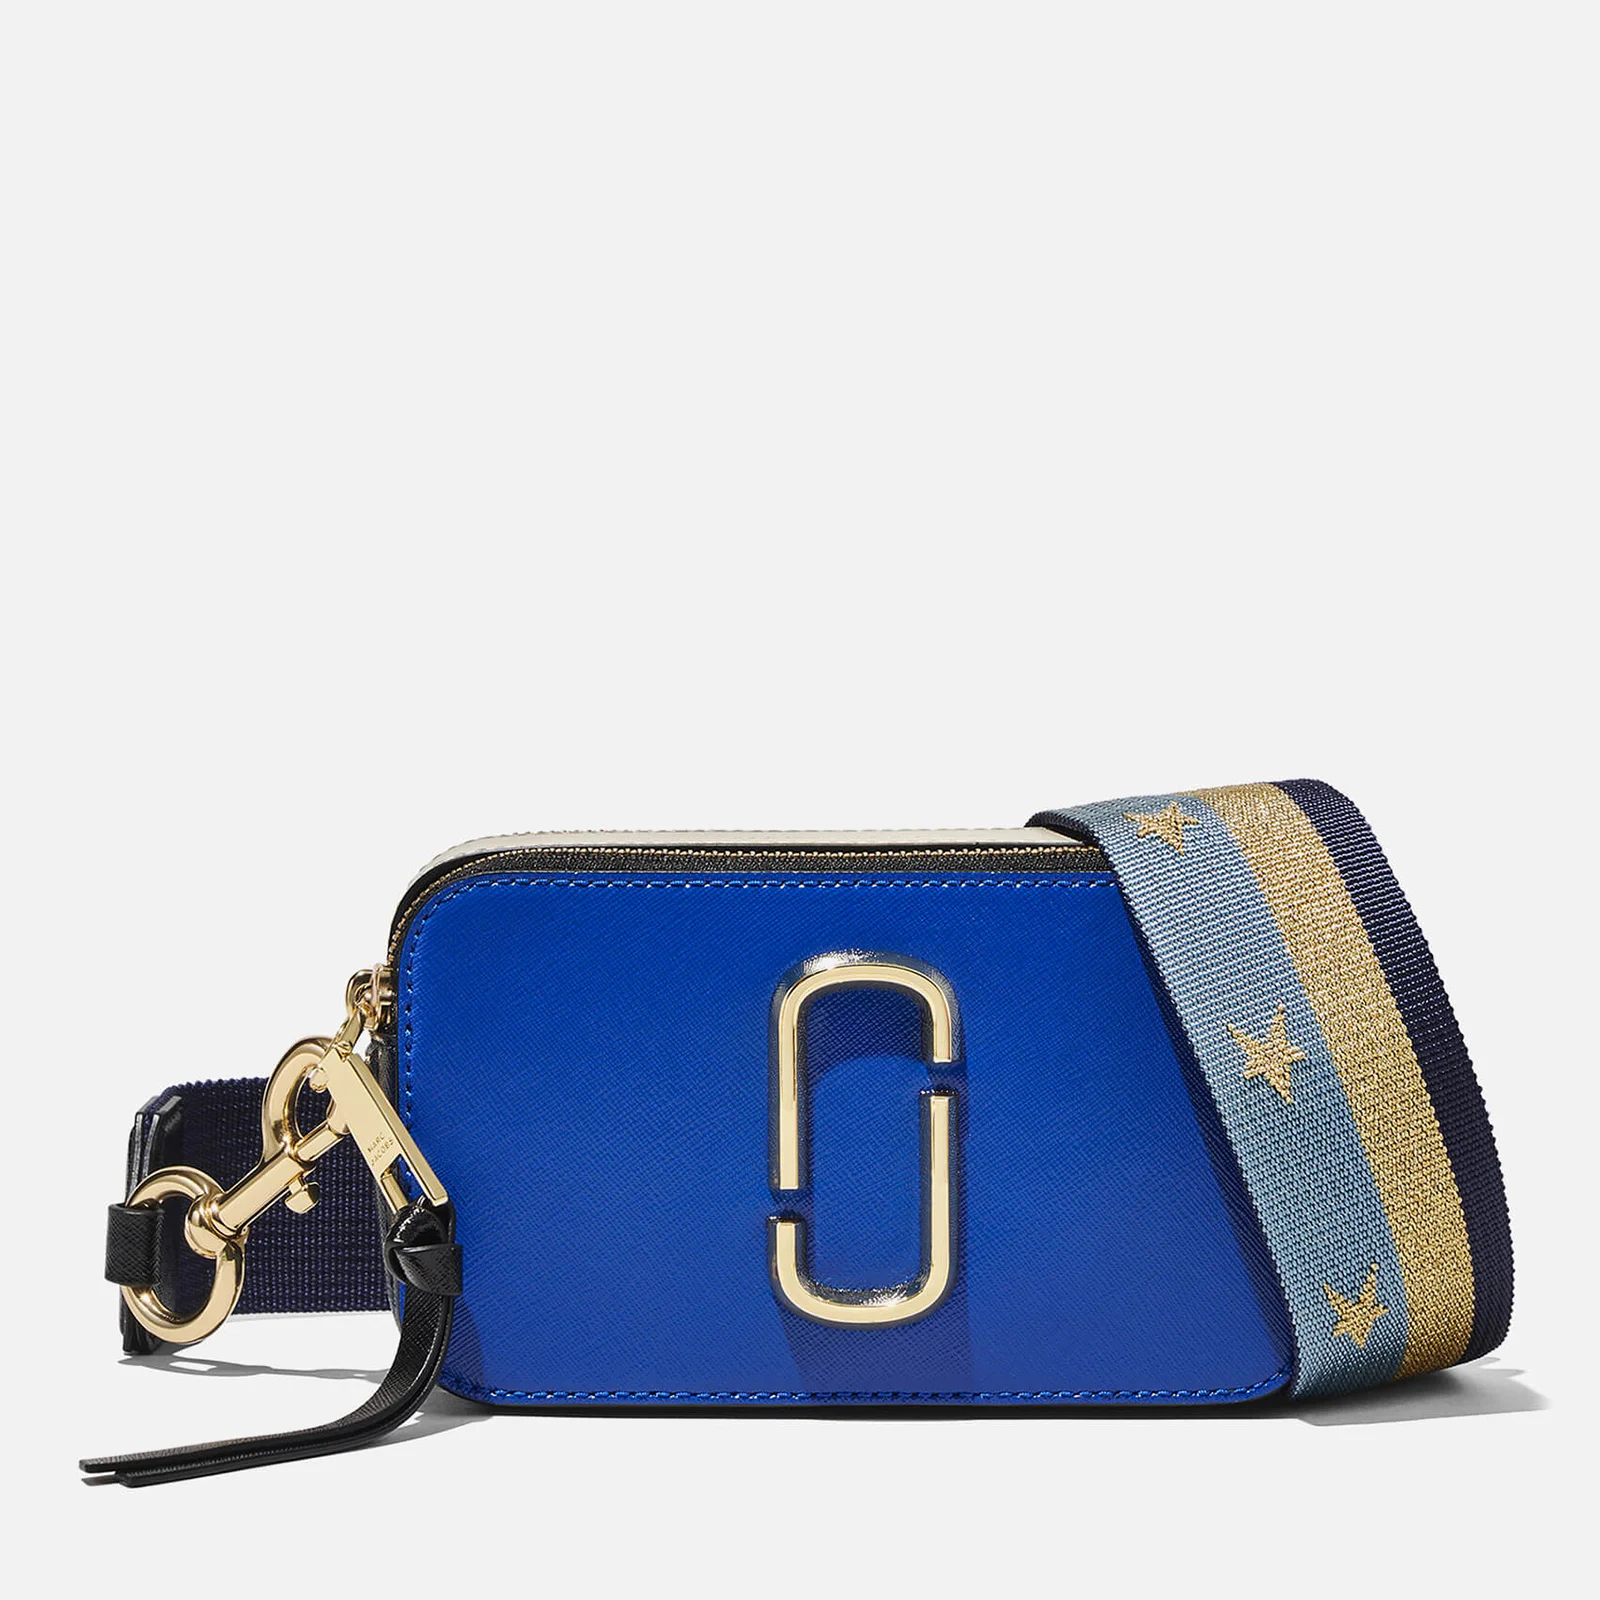 Marc Jacobs The Americana Snapshot Saffiano Leather Bag Image 1